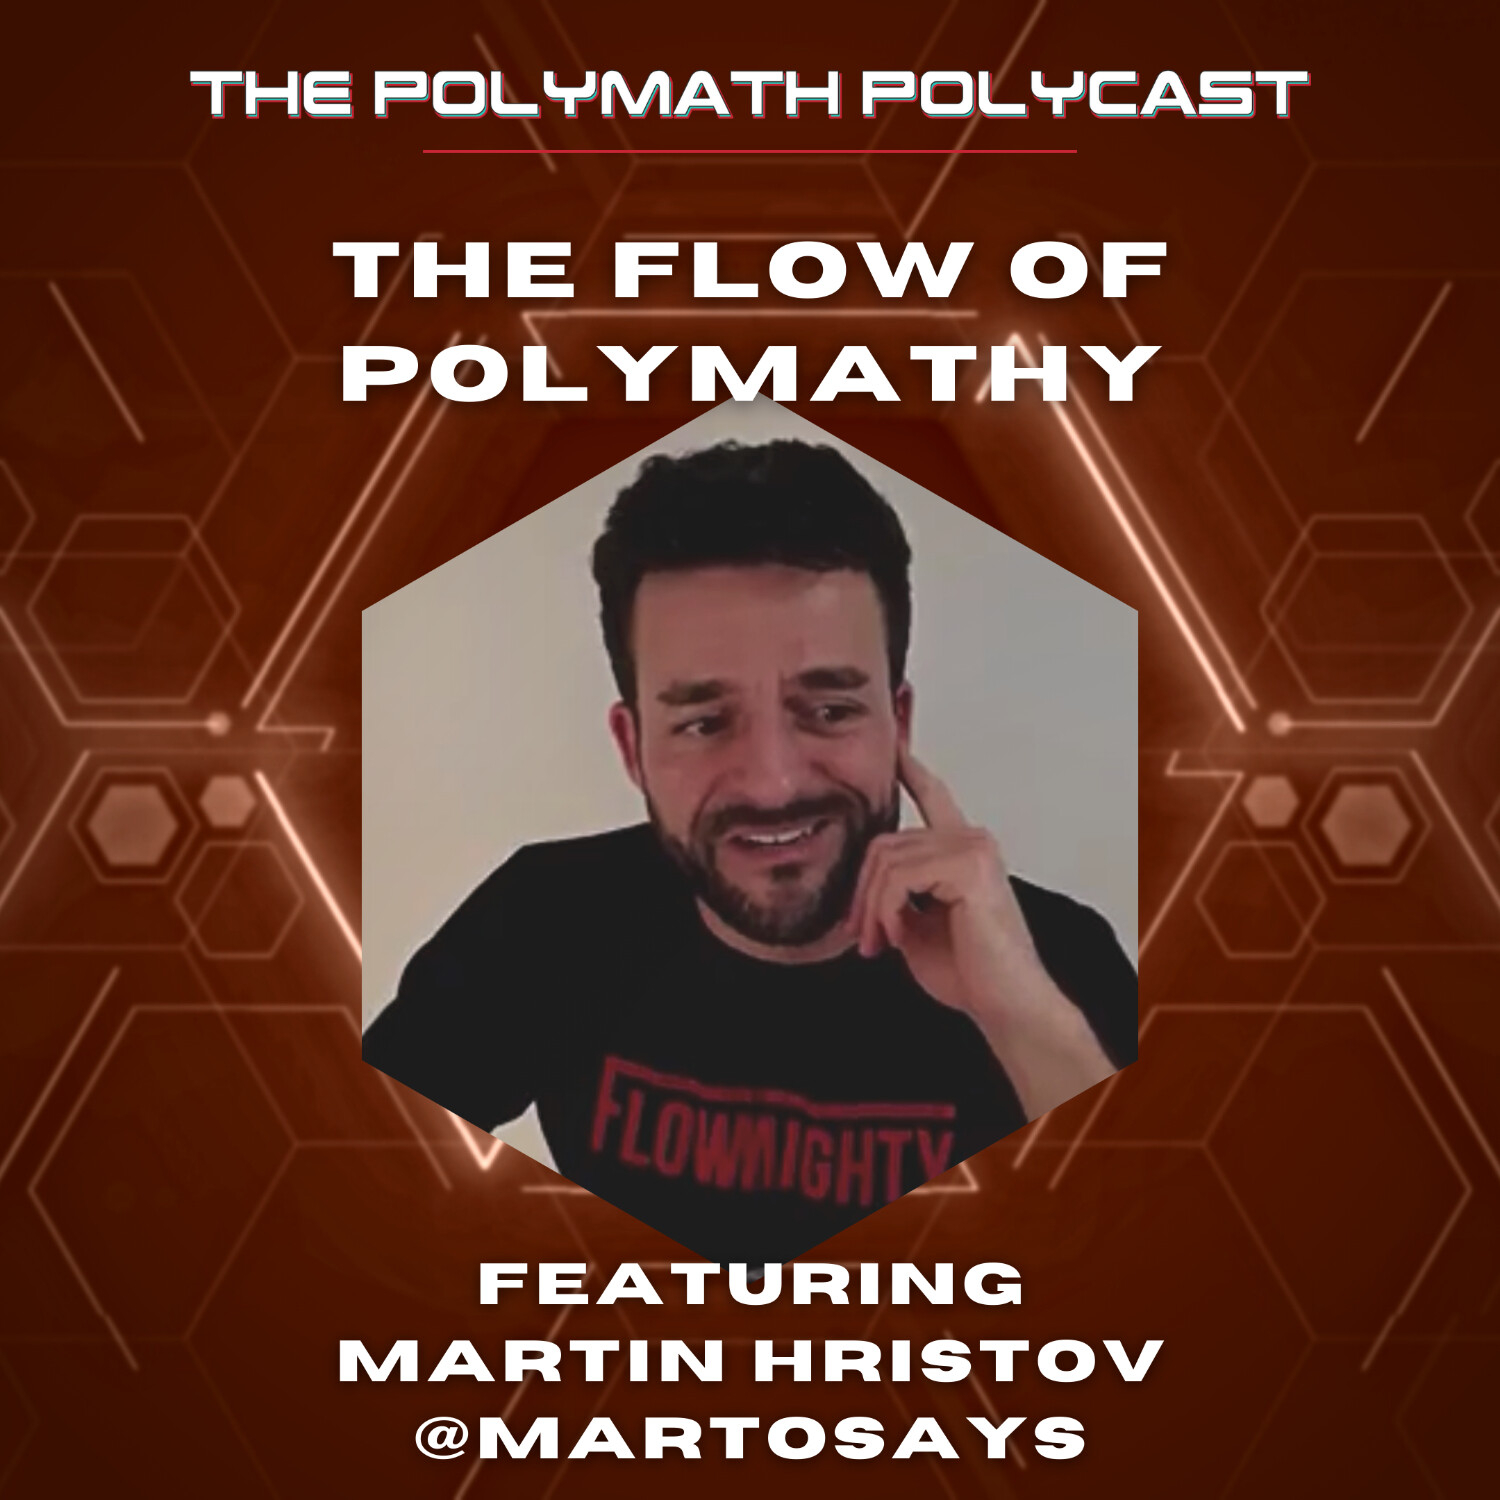 The Flow of Polymathy with Martin Hristov #ThePolymathPolyCast